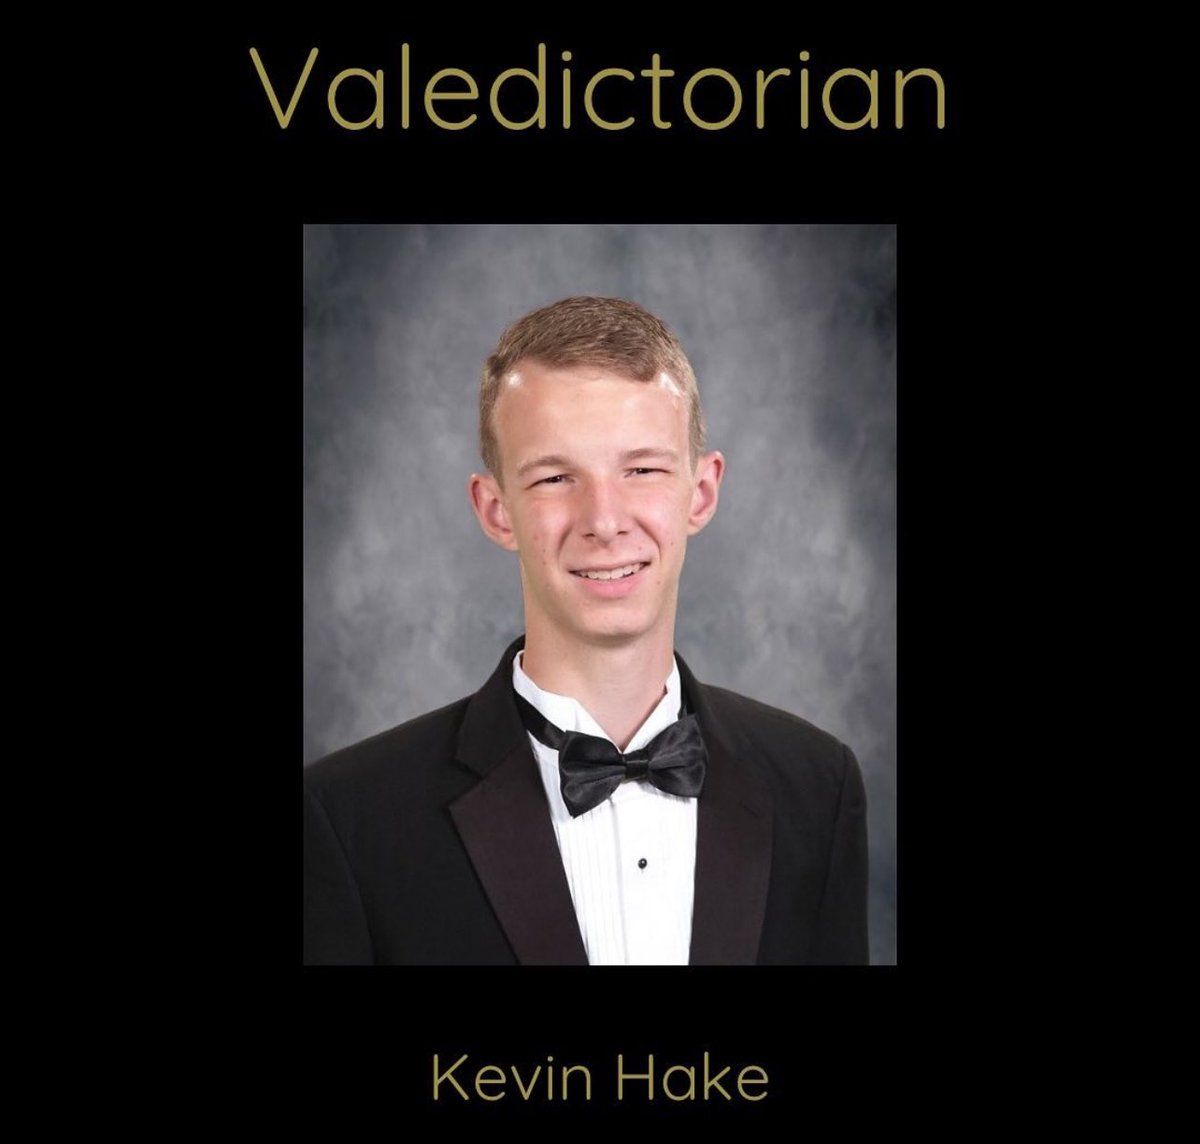 Congratulations to our very own Cadet Hake for being named the SHS Valedictorian! We are very proud of you and your accomplishments. #WeAreRCSTN #RobCoAFJROTC